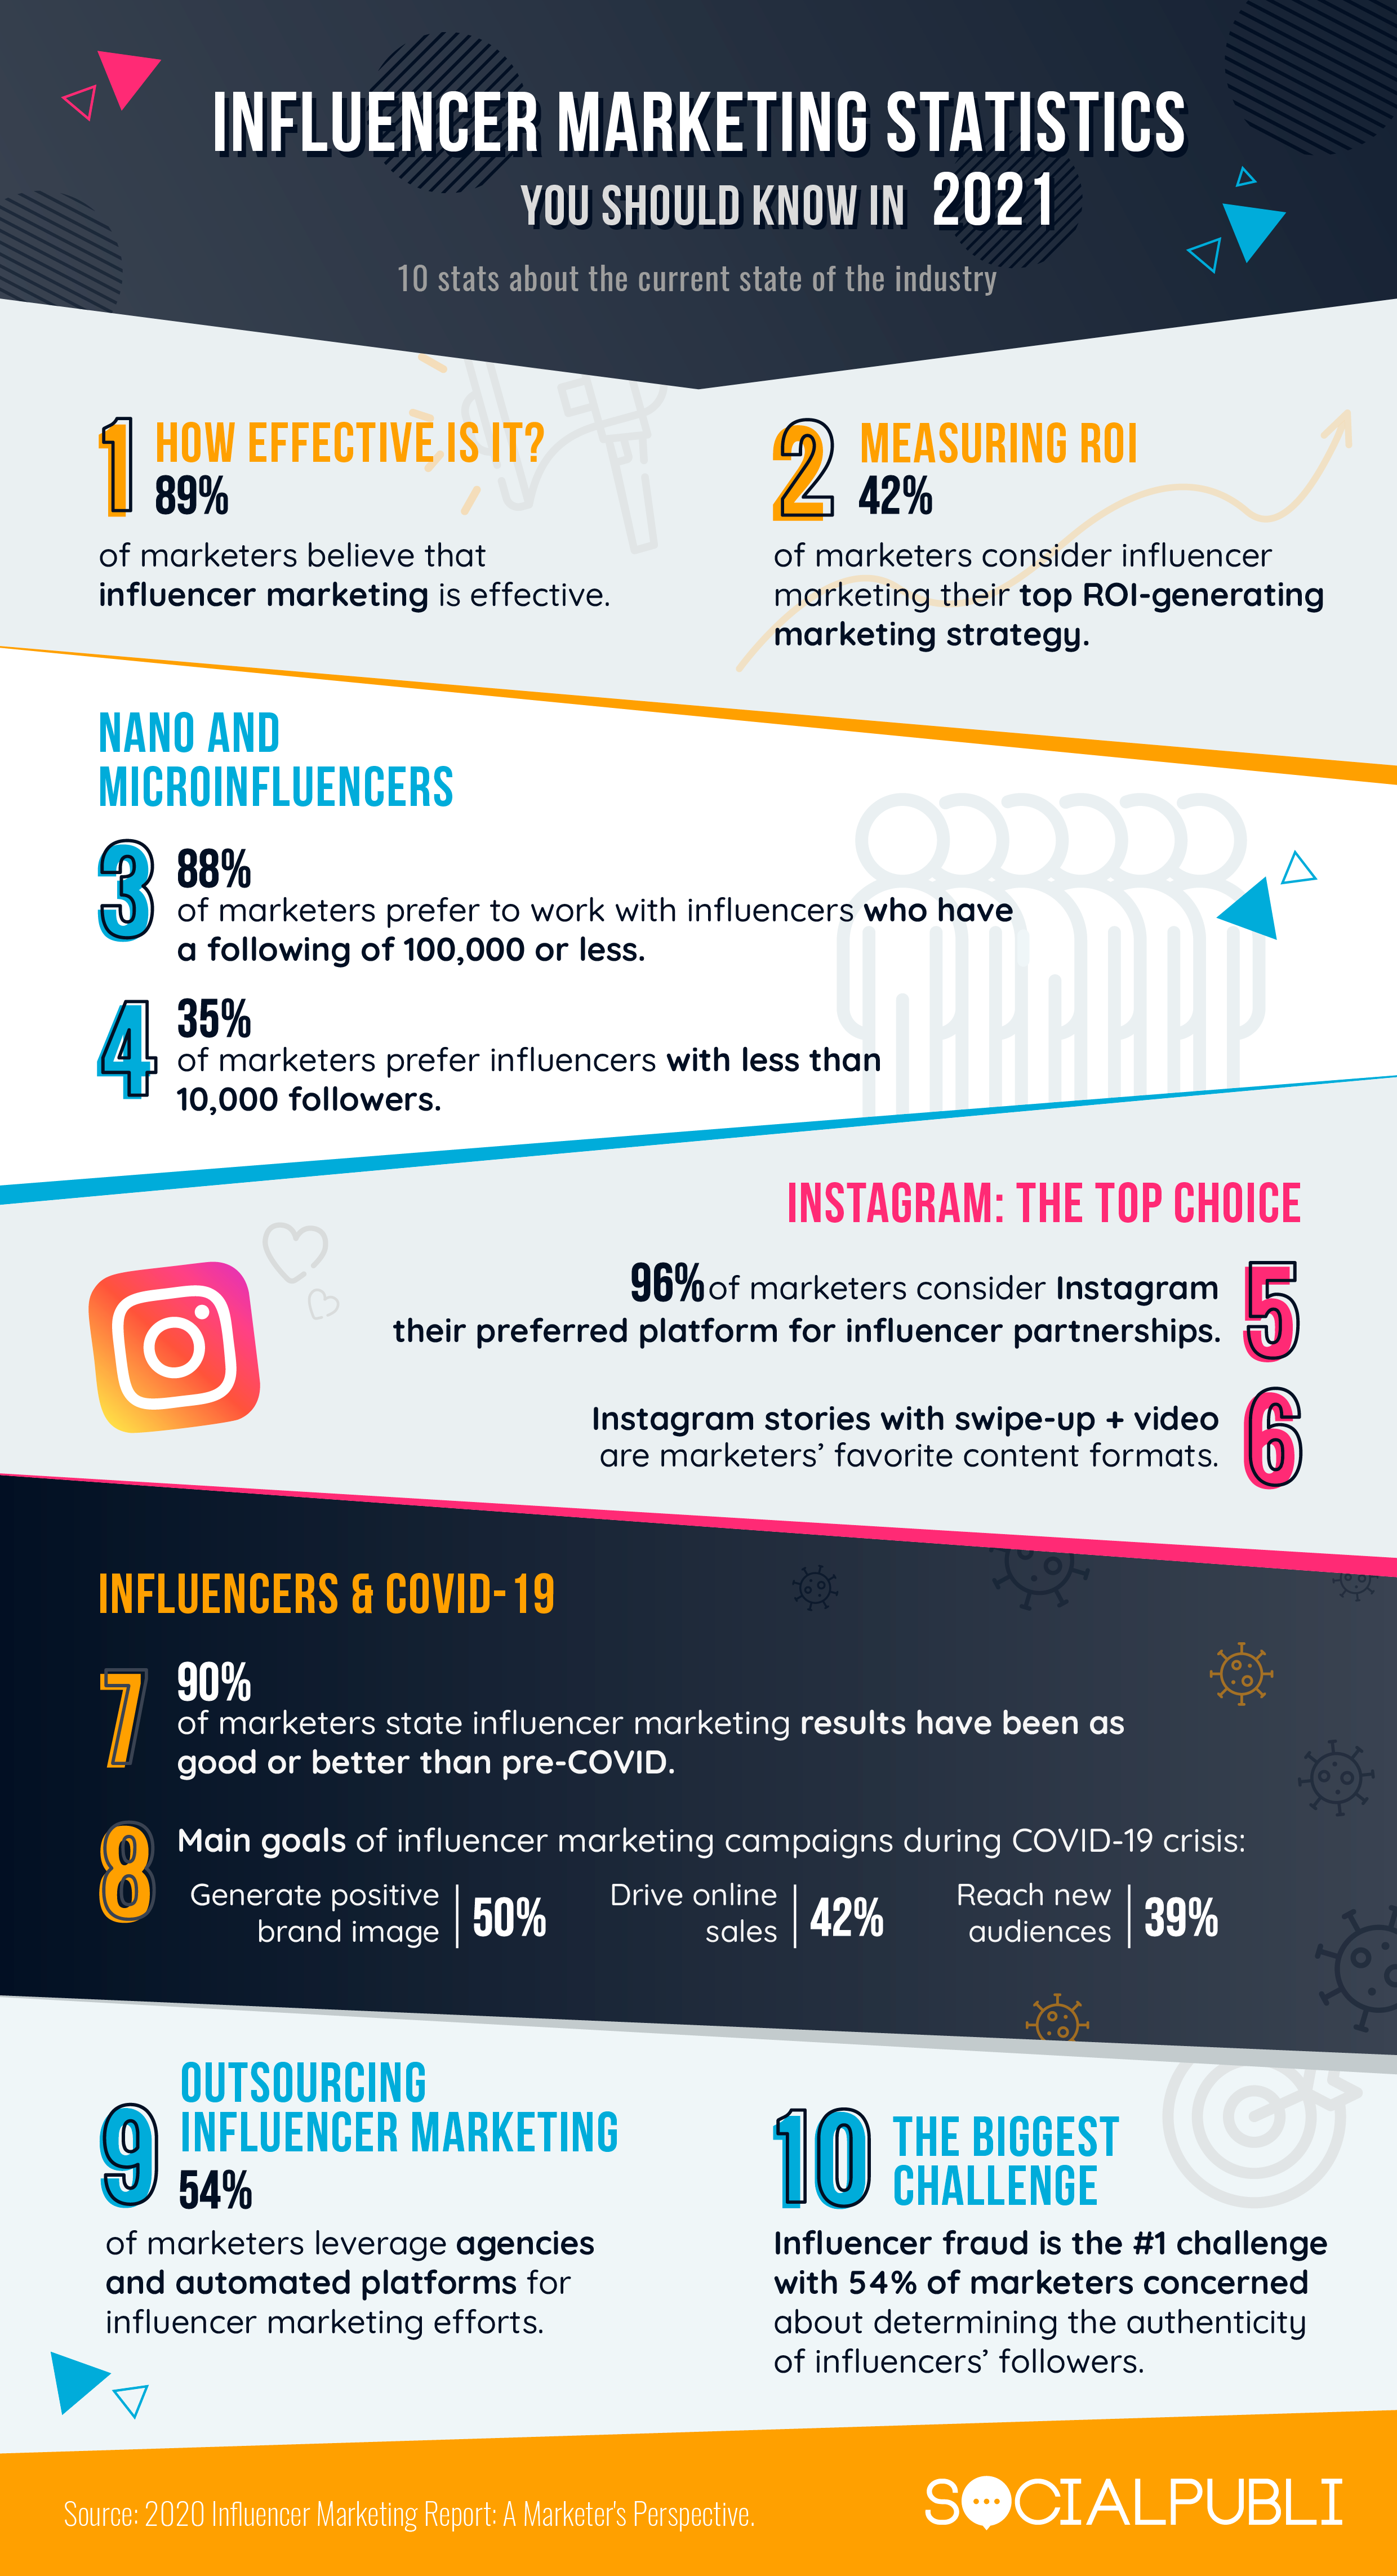 10 influencer marketing stats for 2021 infographic